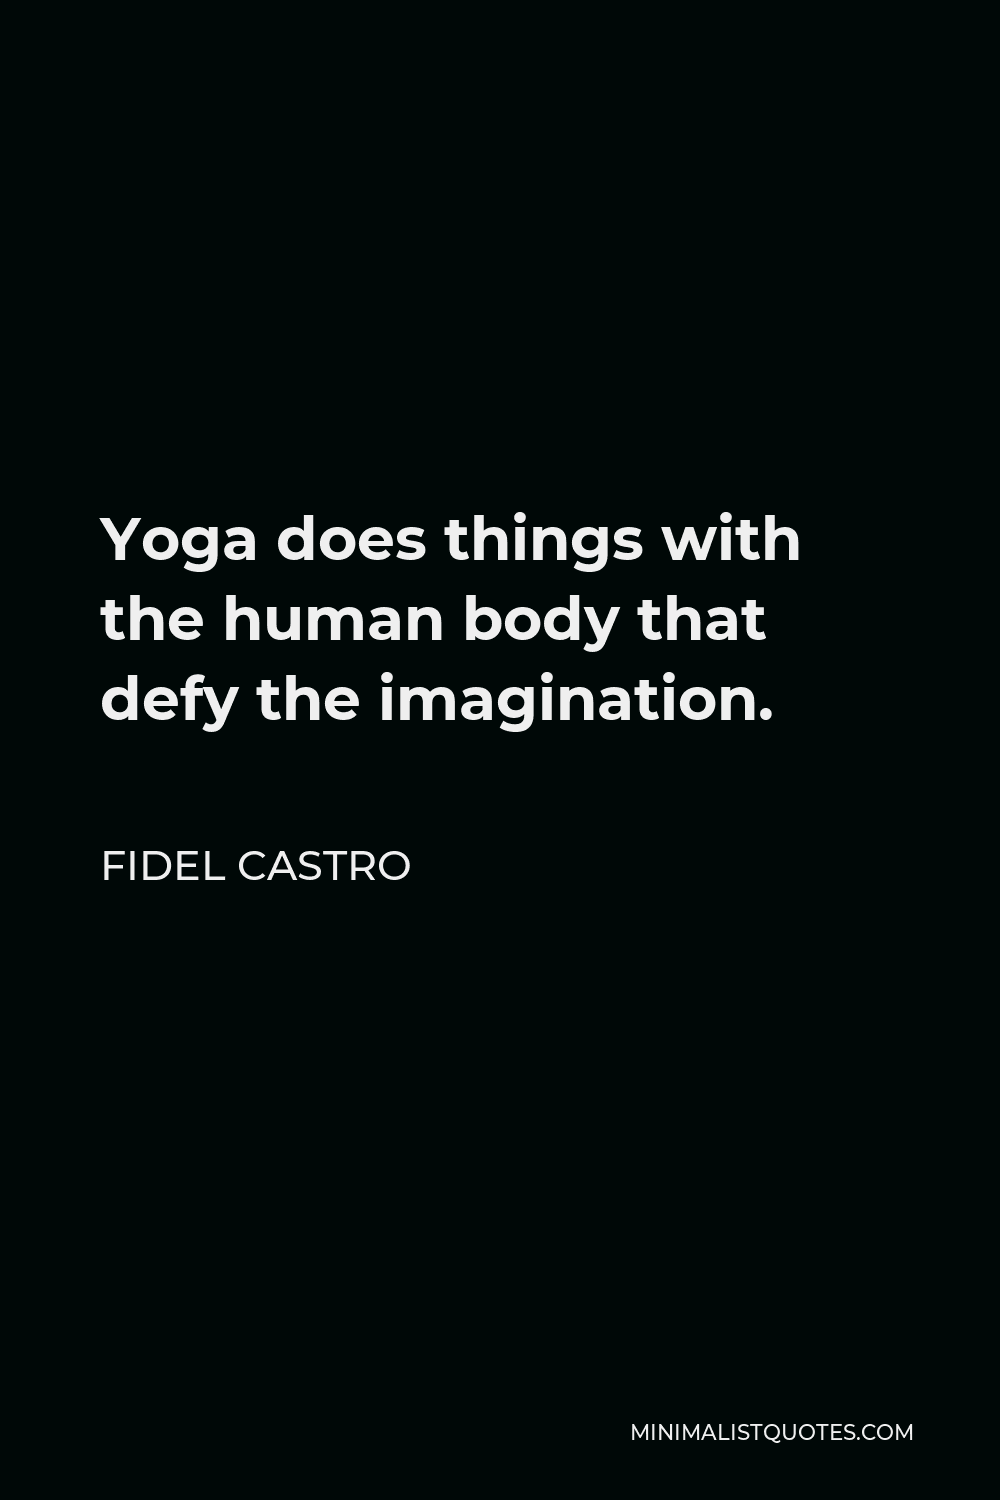 Fidel Castro Quote - Yoga does things with the human body that defy the imagination.